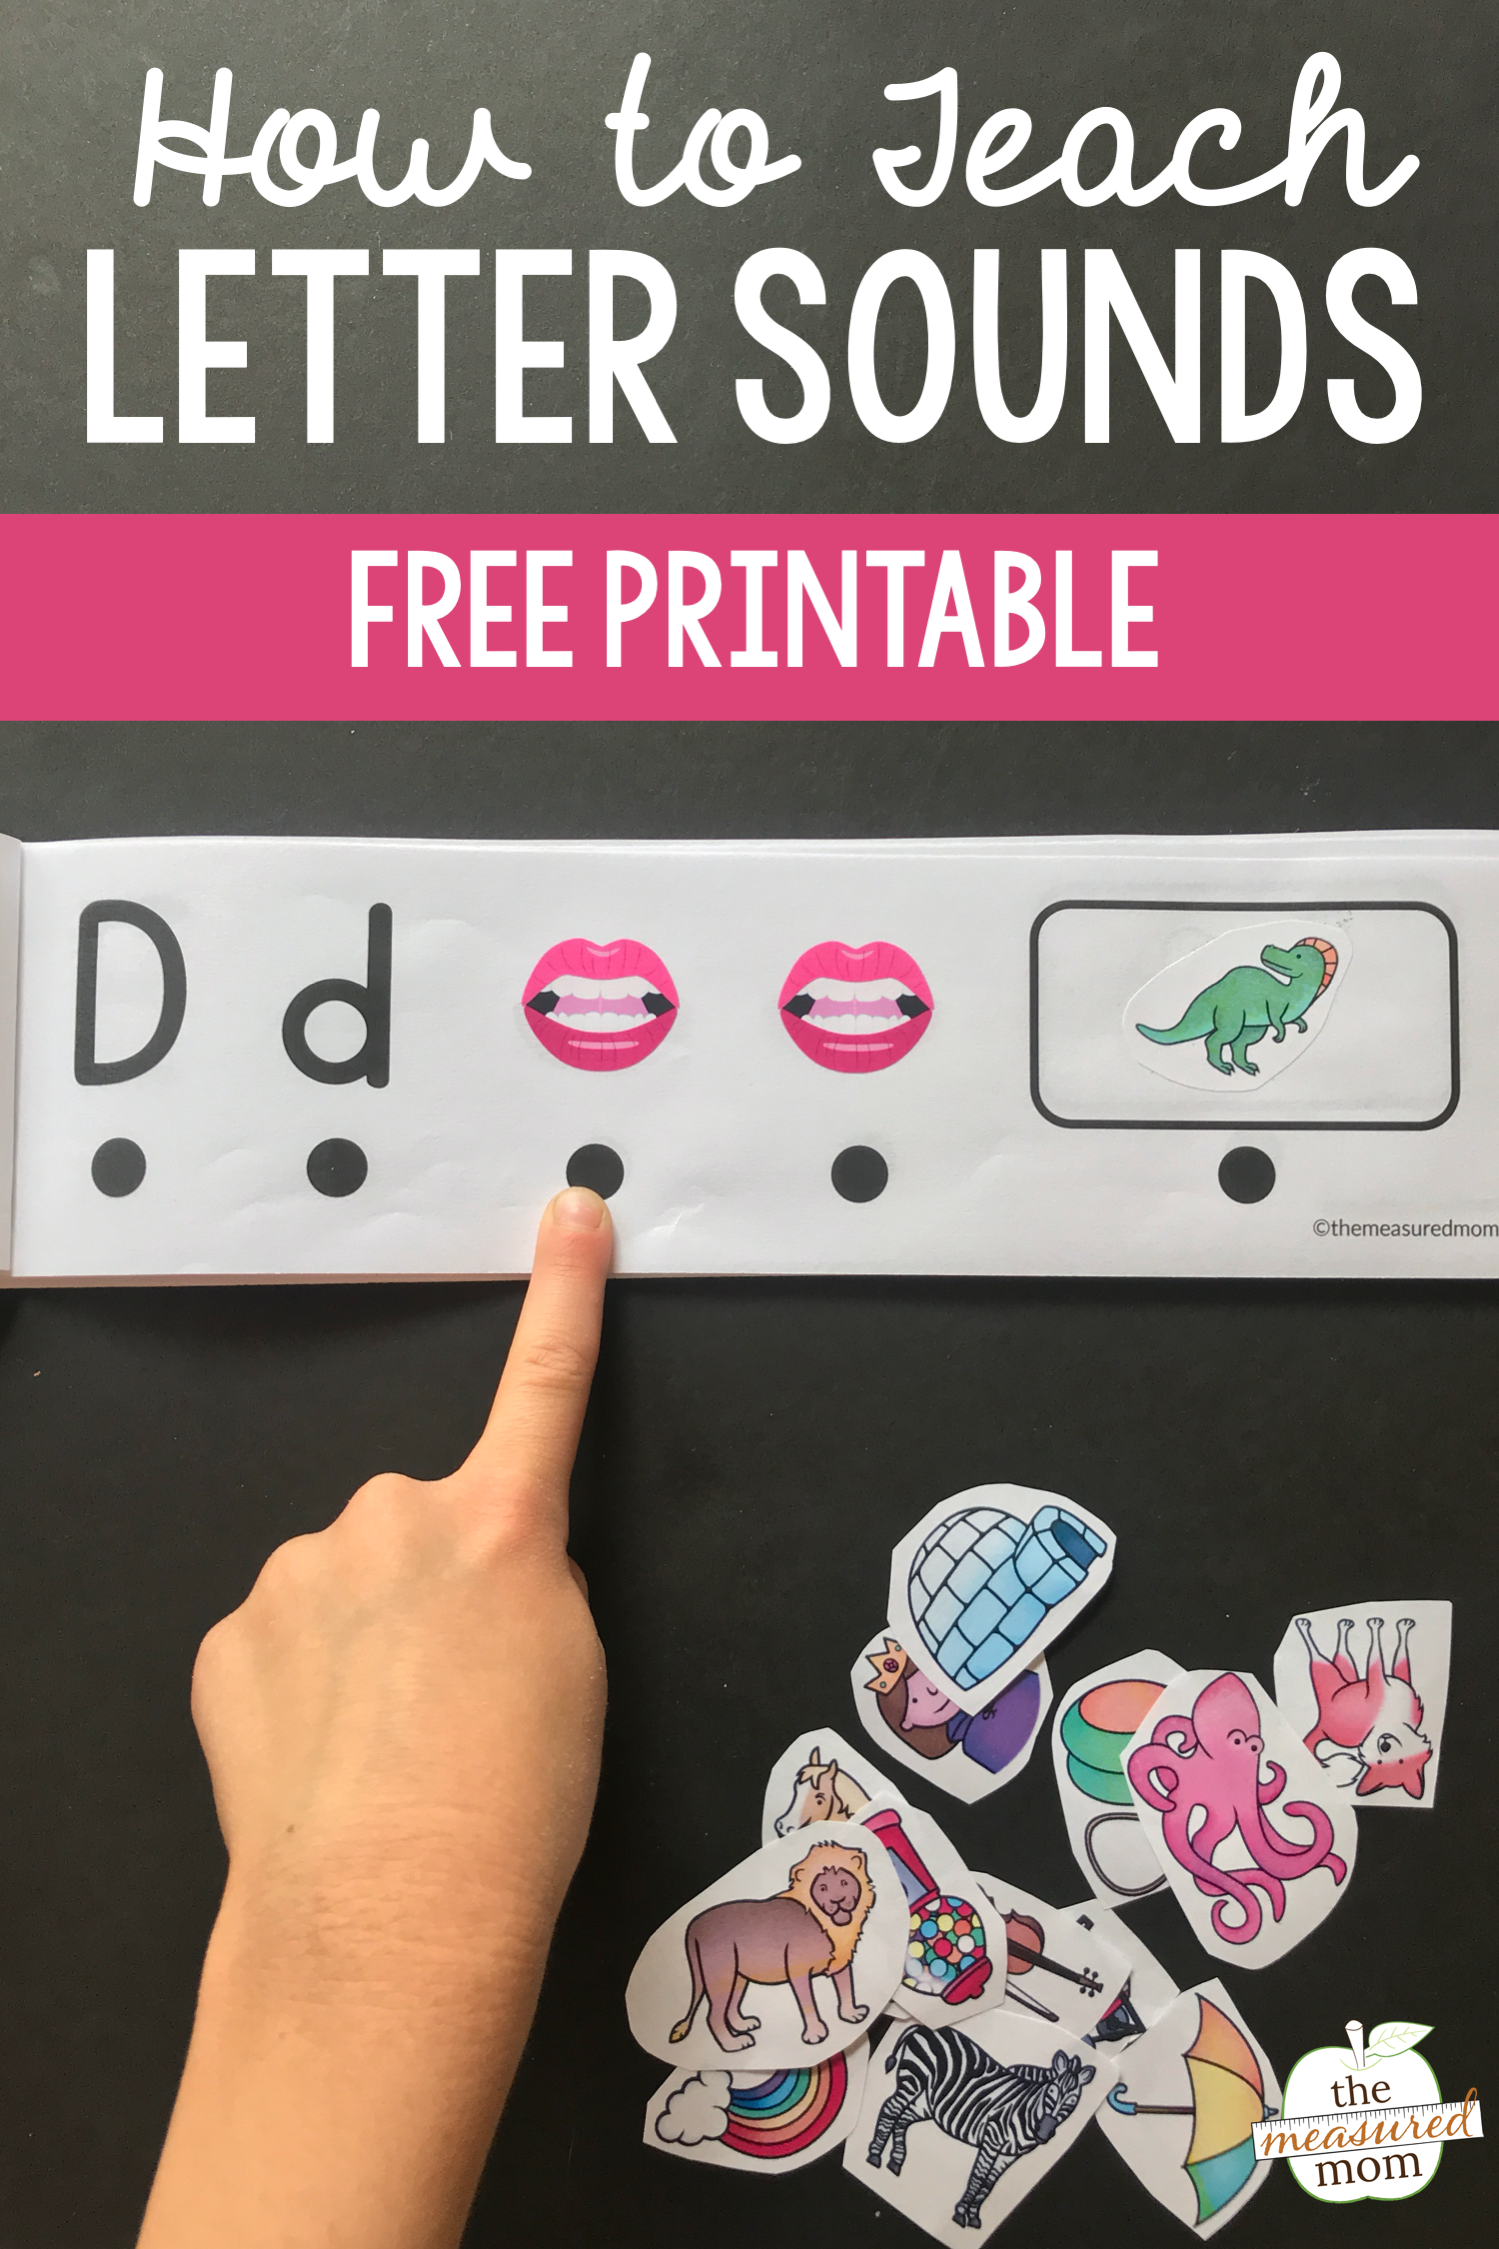 Printable for teaching letter sounds